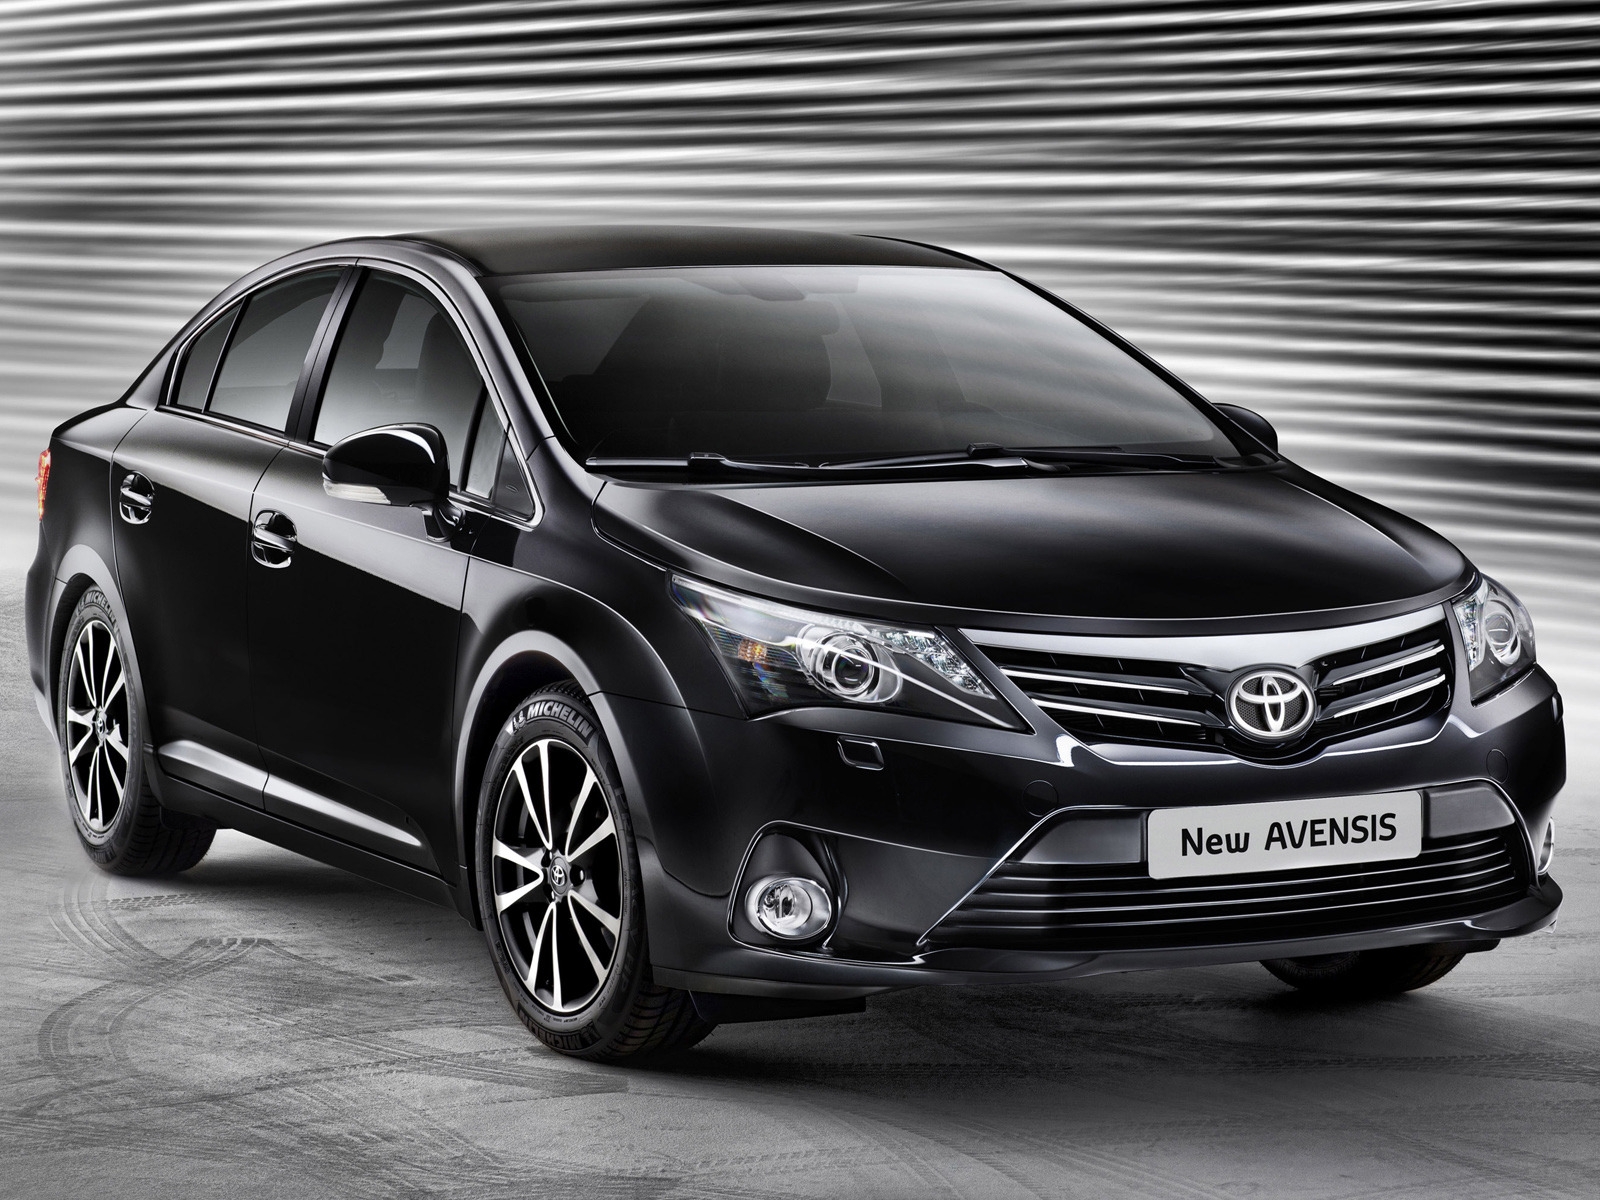 2012 Toyota Avensis for 1600 x 1200 resolution